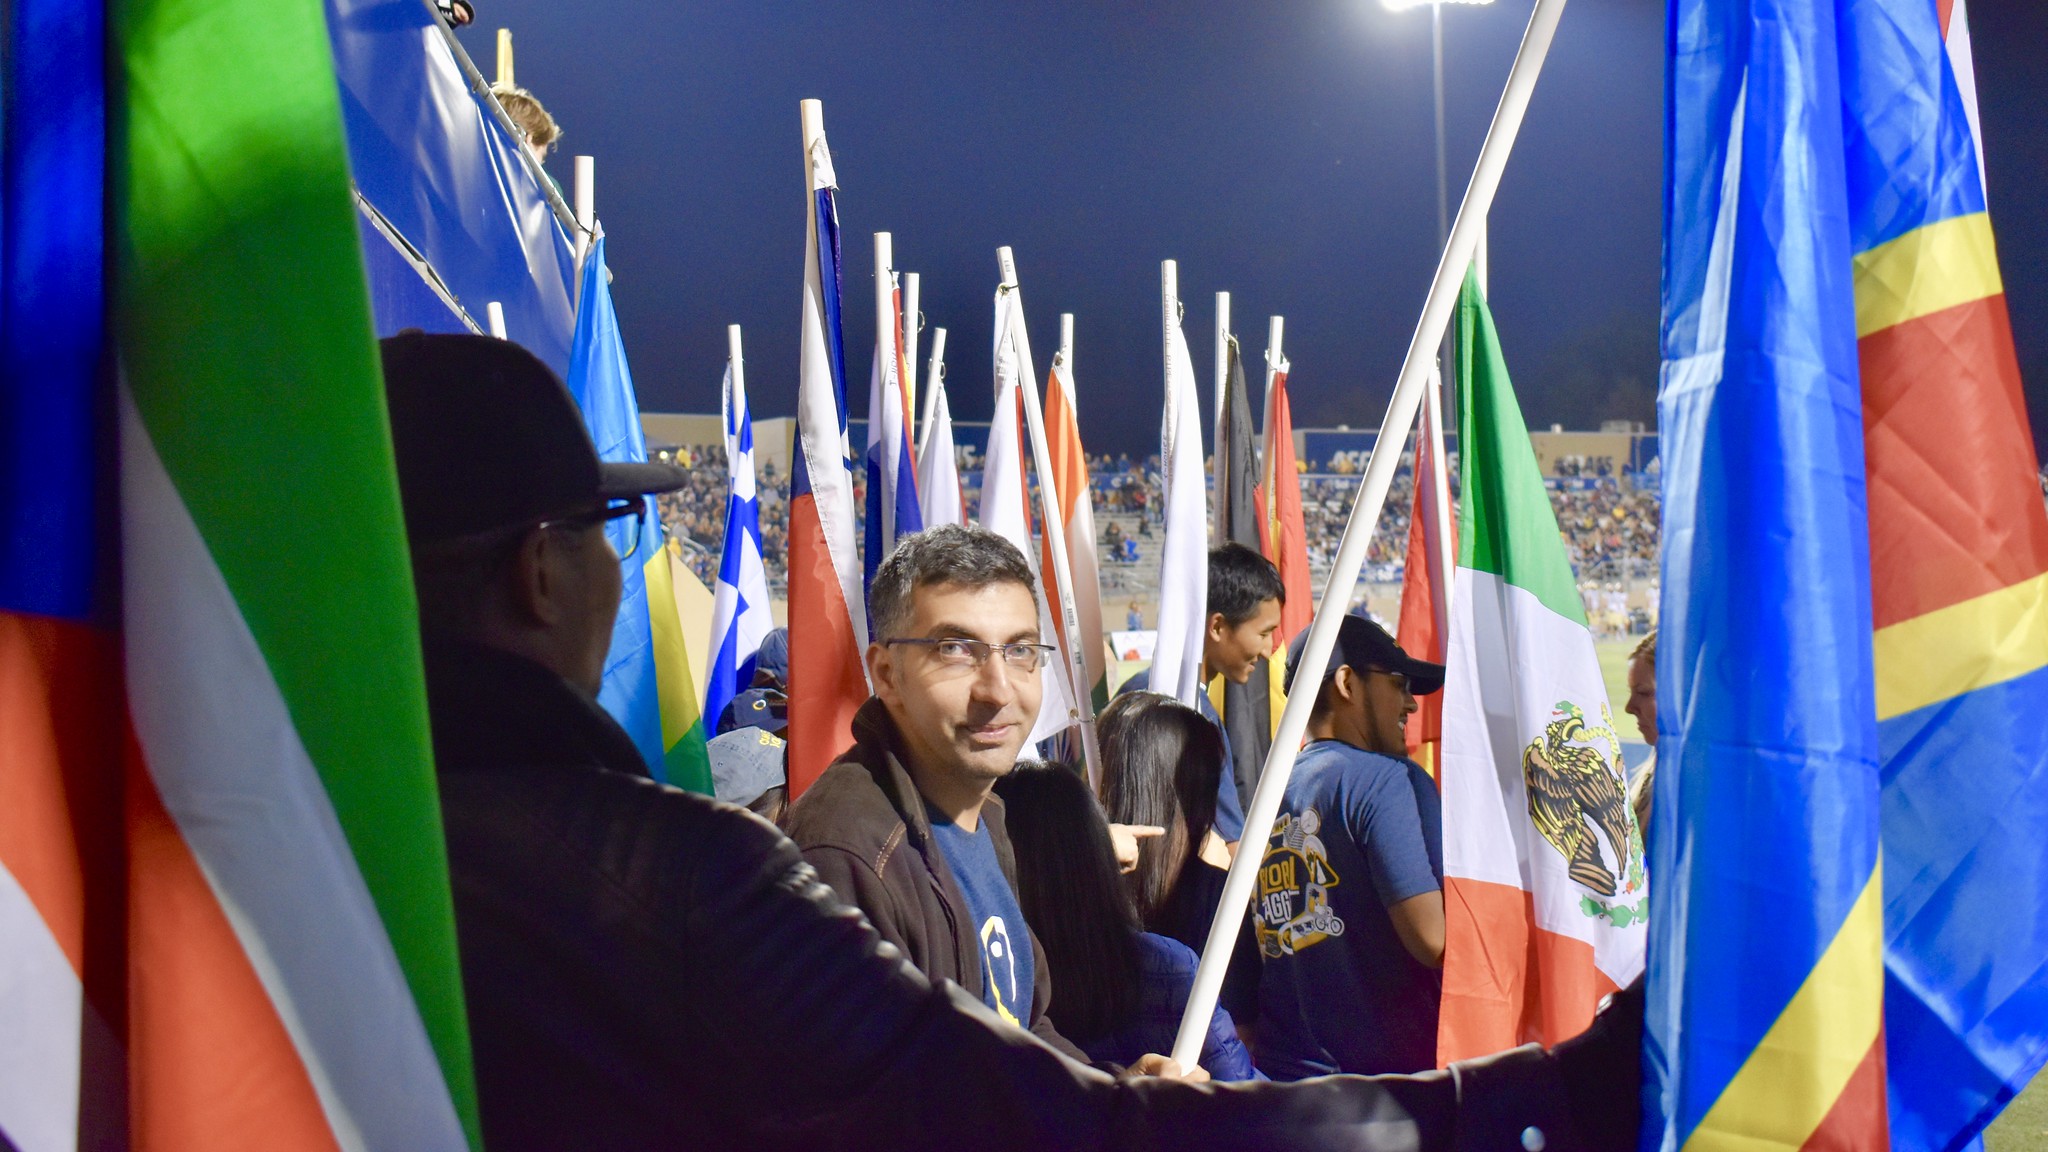 Fellow with flags